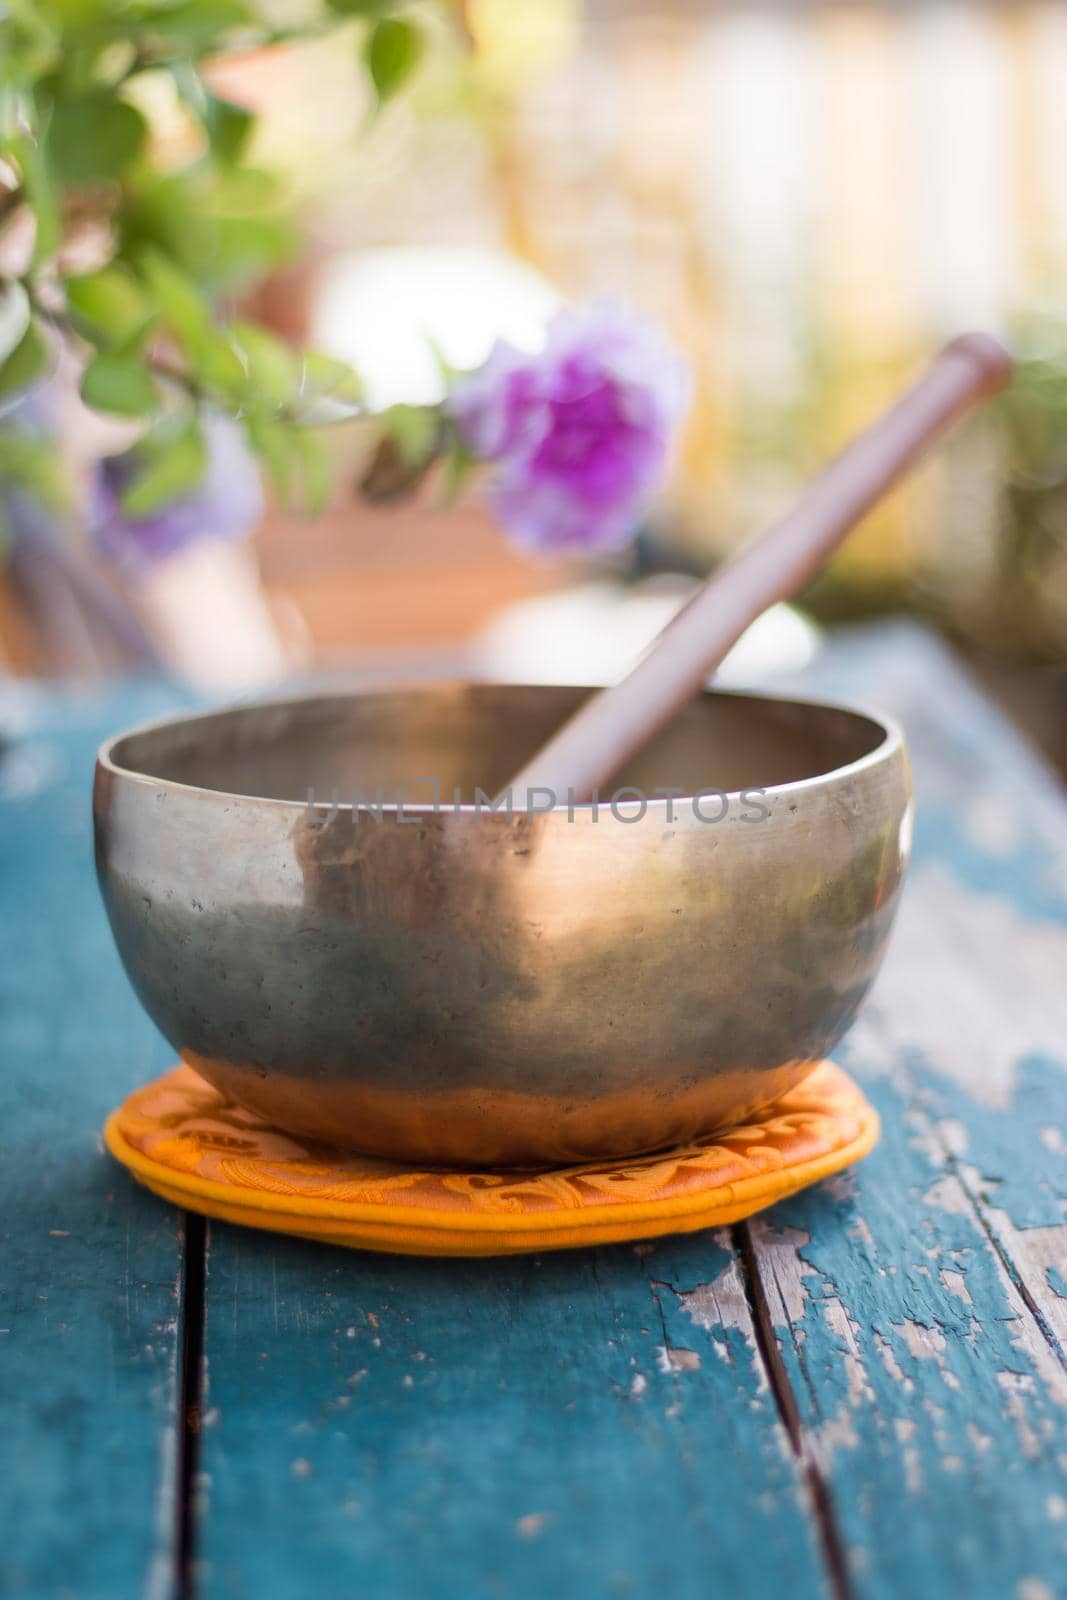 Metal singing bowl on a rustic green, wooden table outdoors. Flowers in the colourful, blurry background